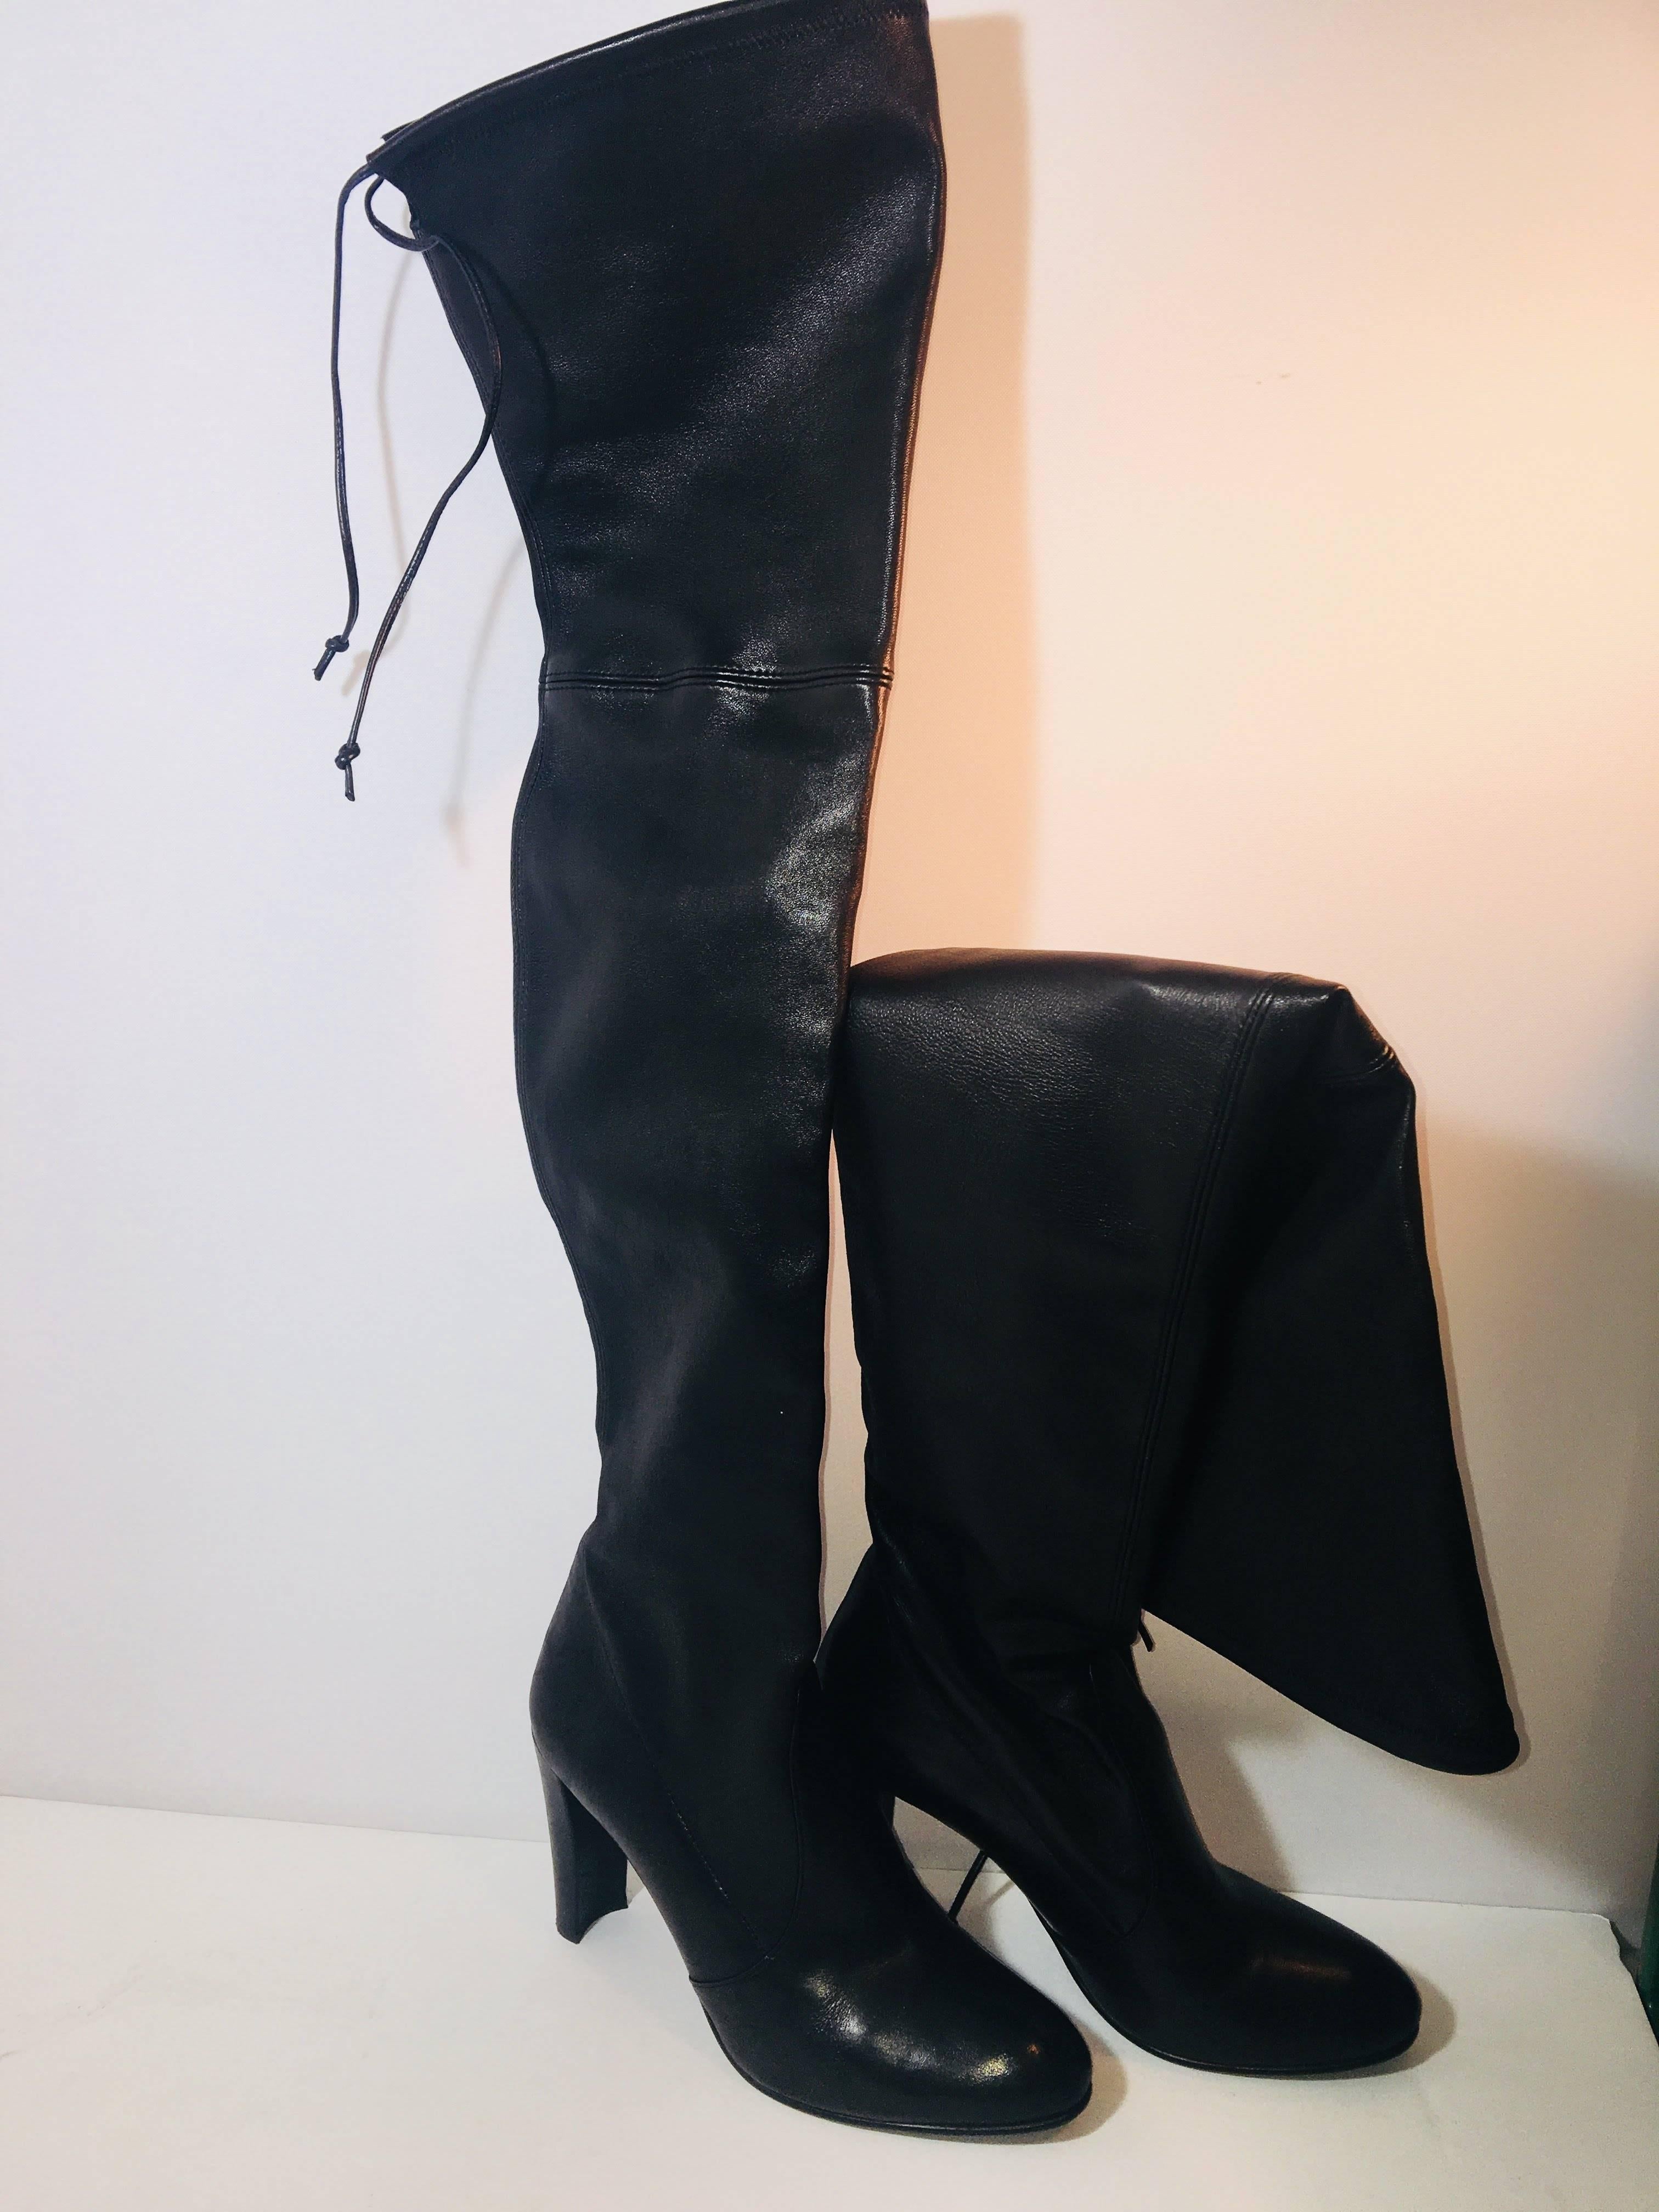 Stuart Weitzman Thigh-High Boots in Black Leather with Lace up Detail